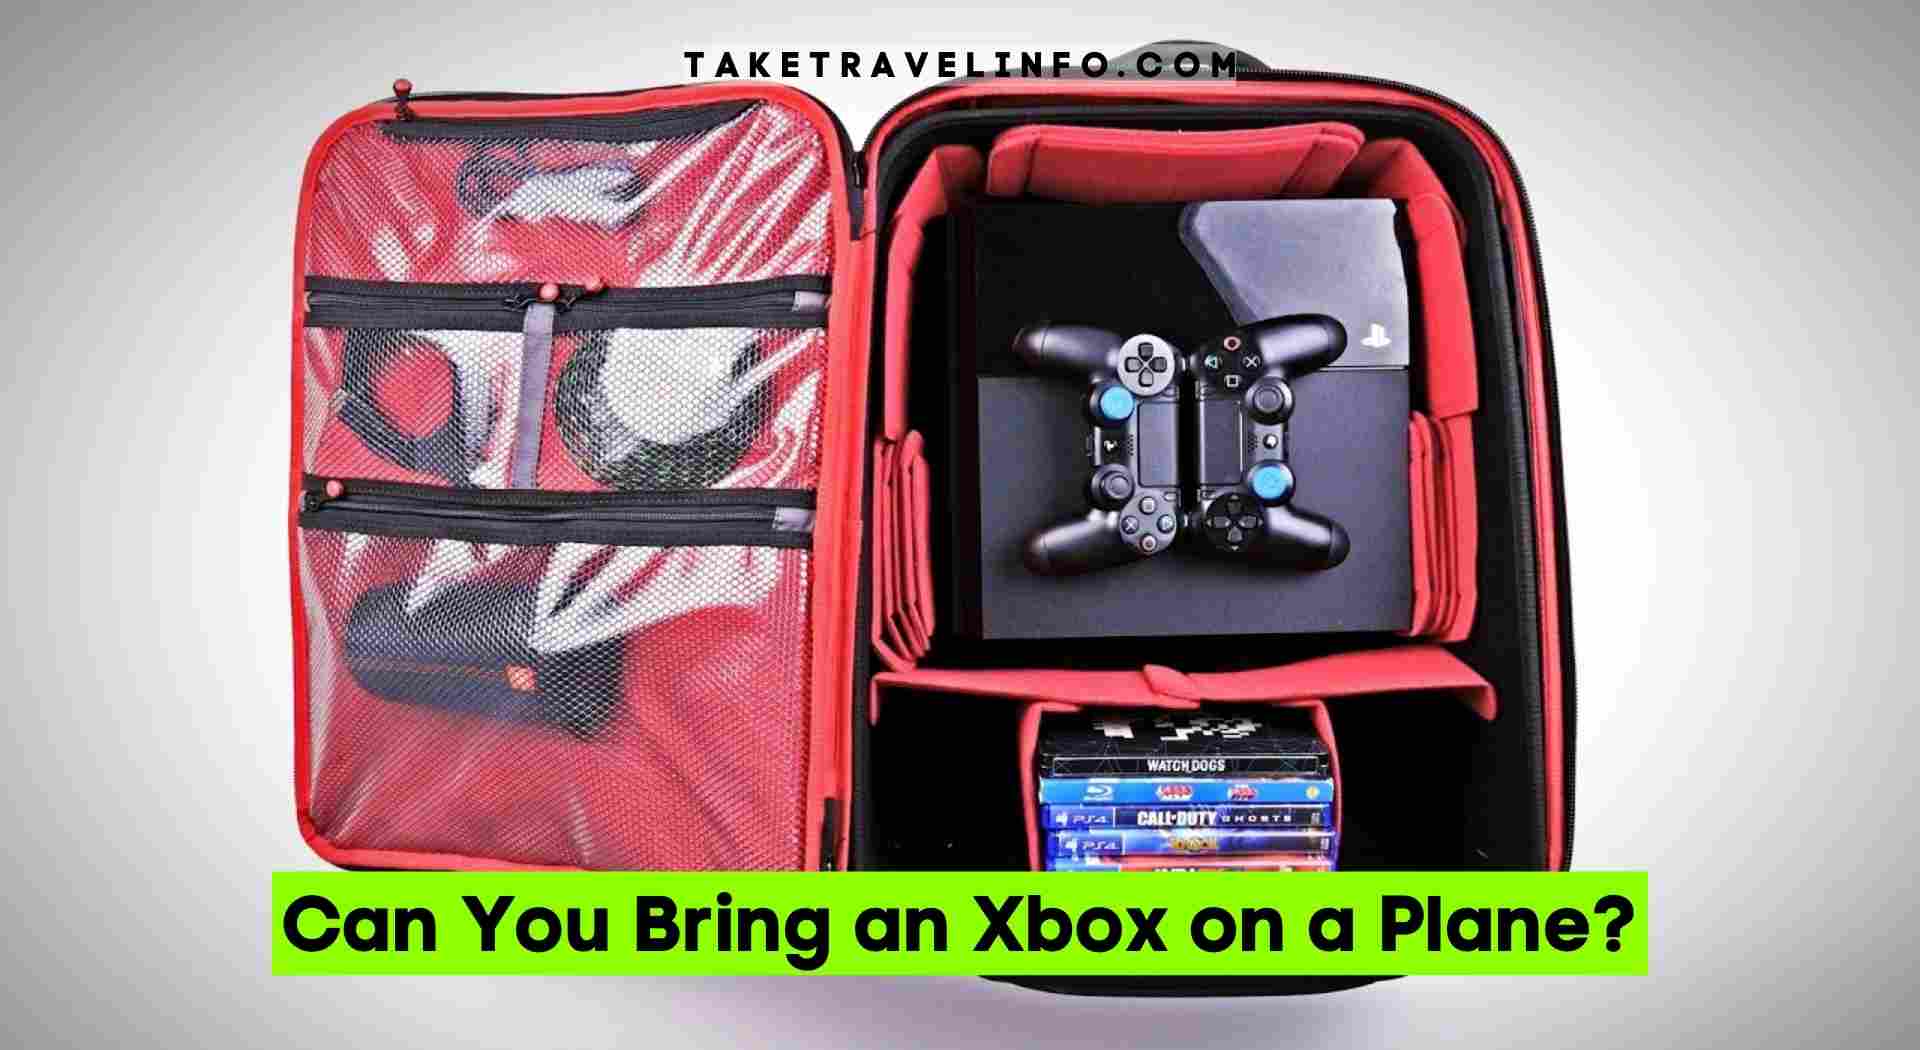 Can You Bring an Xbox on a Plane?